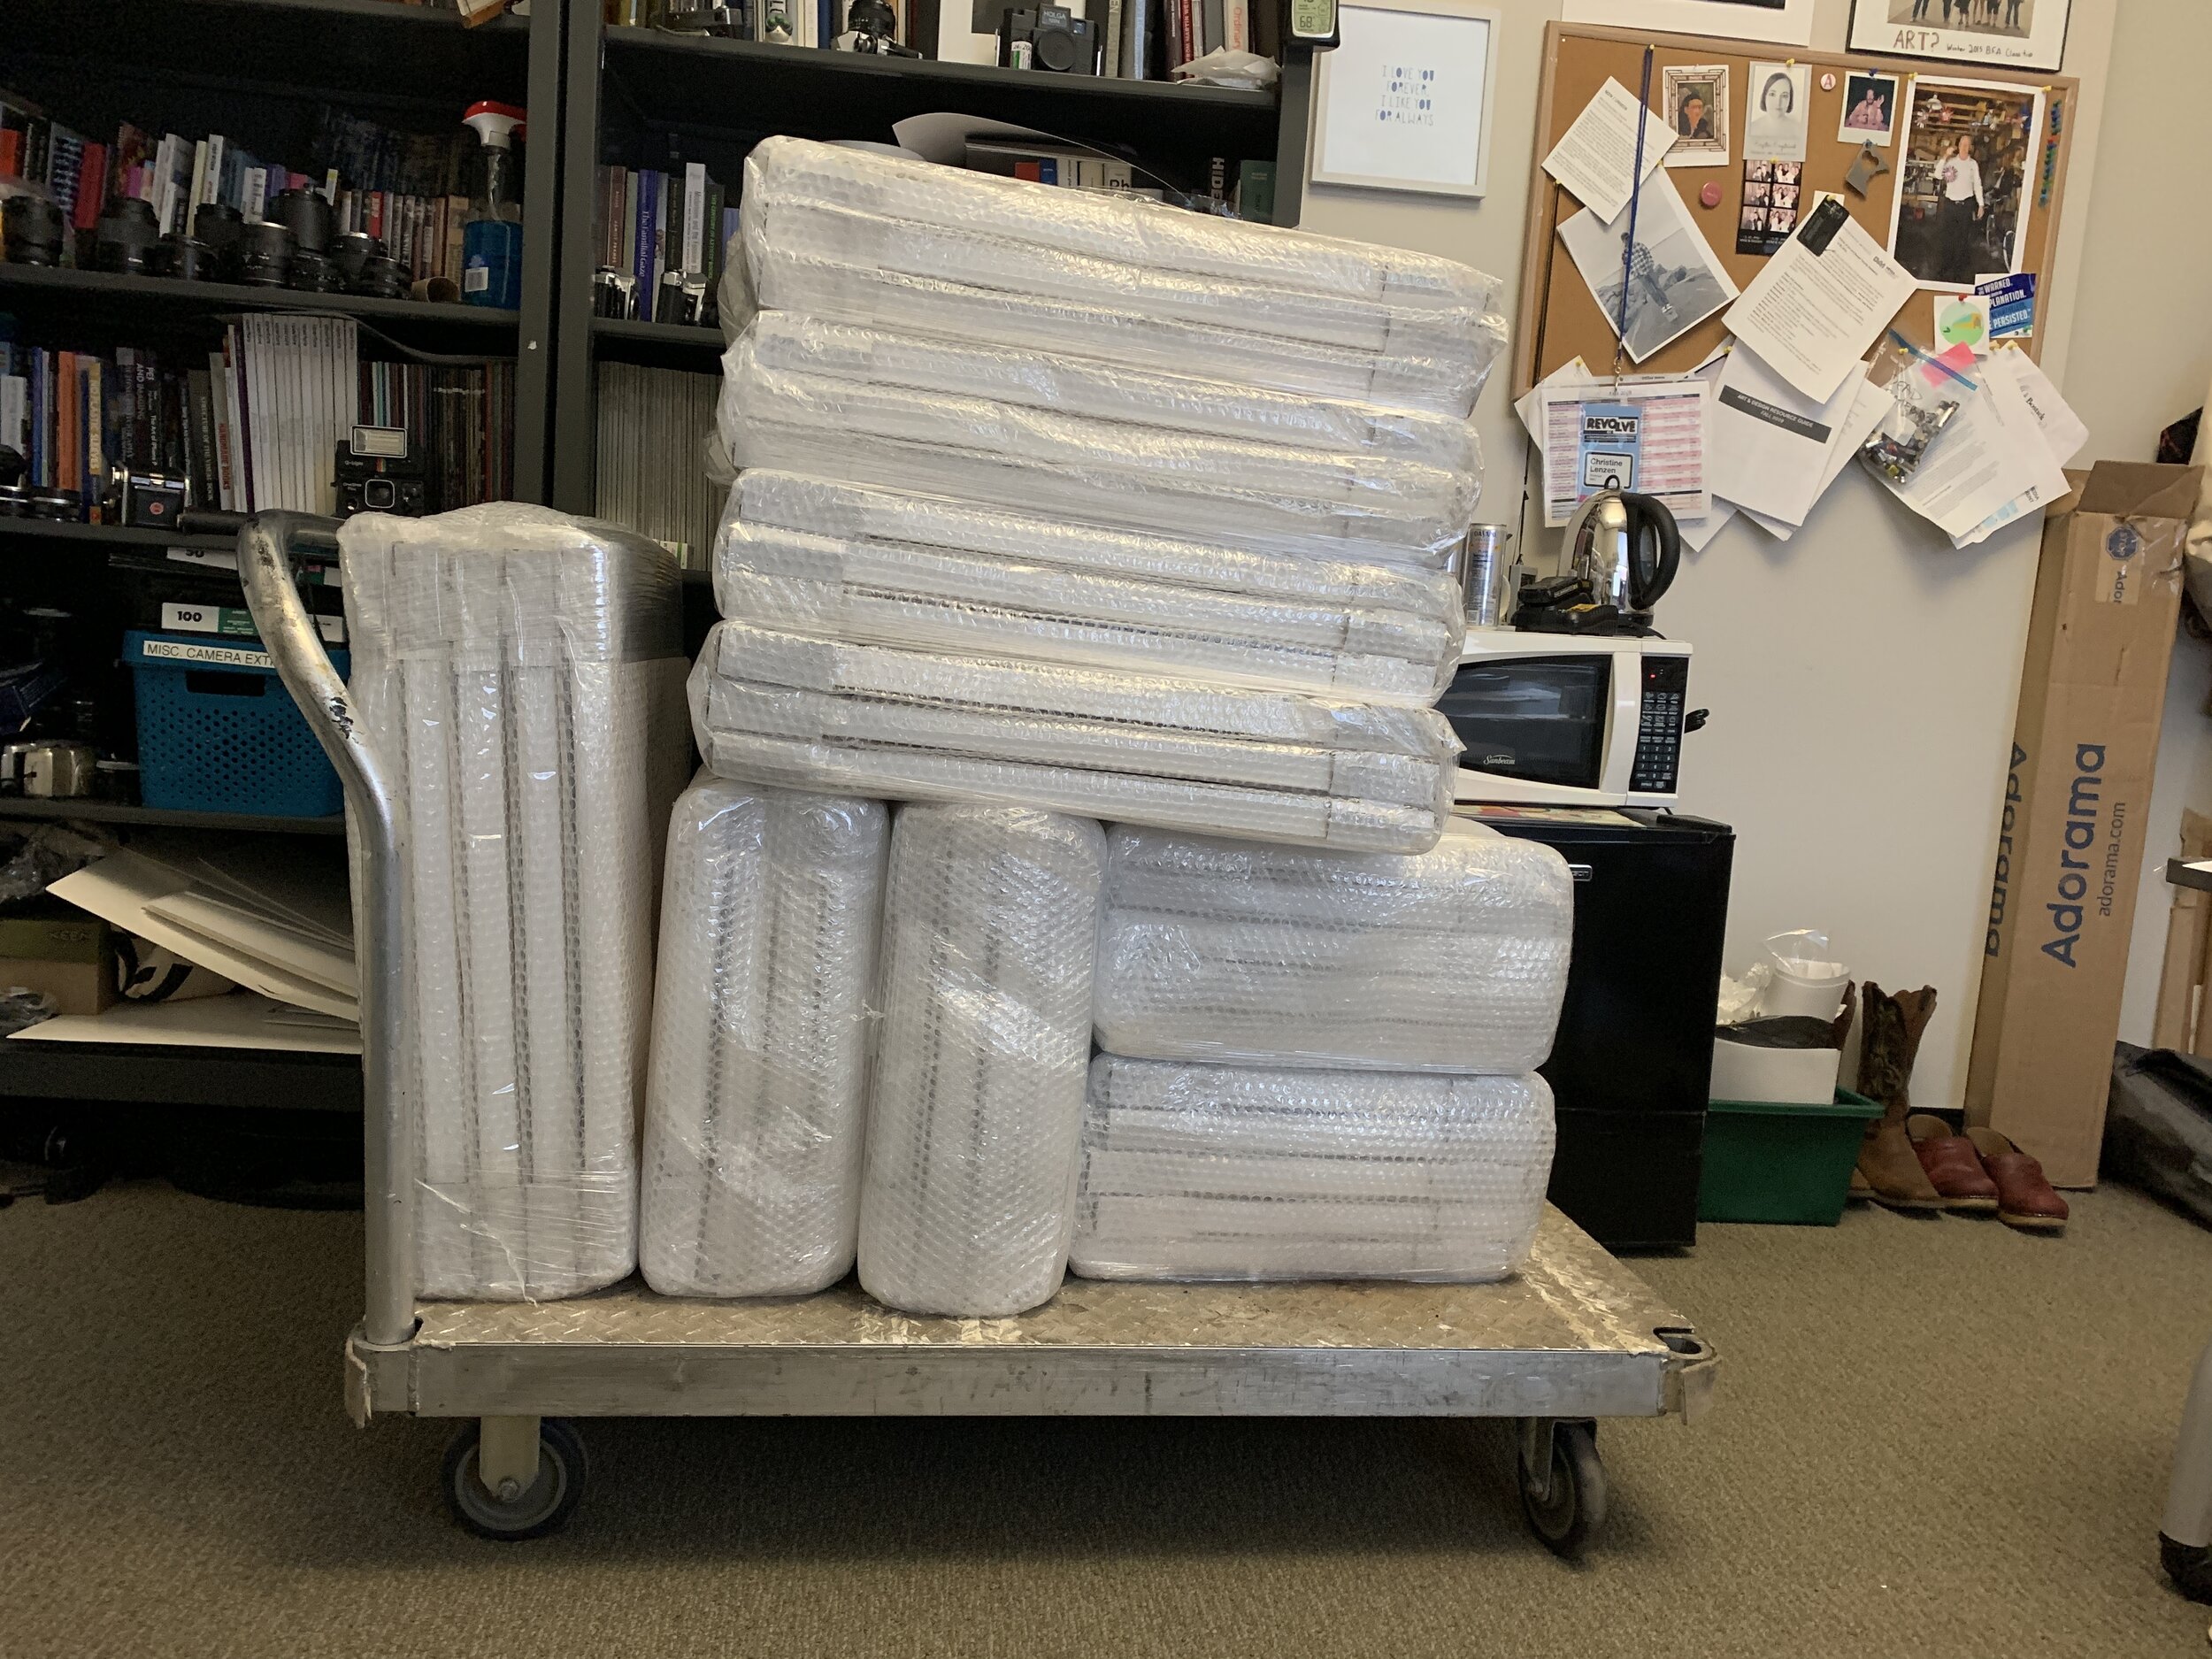  Bonus Image: Here’s a shot of all 35 pieces bubble wrapped and ready to drive to Escanaba. 